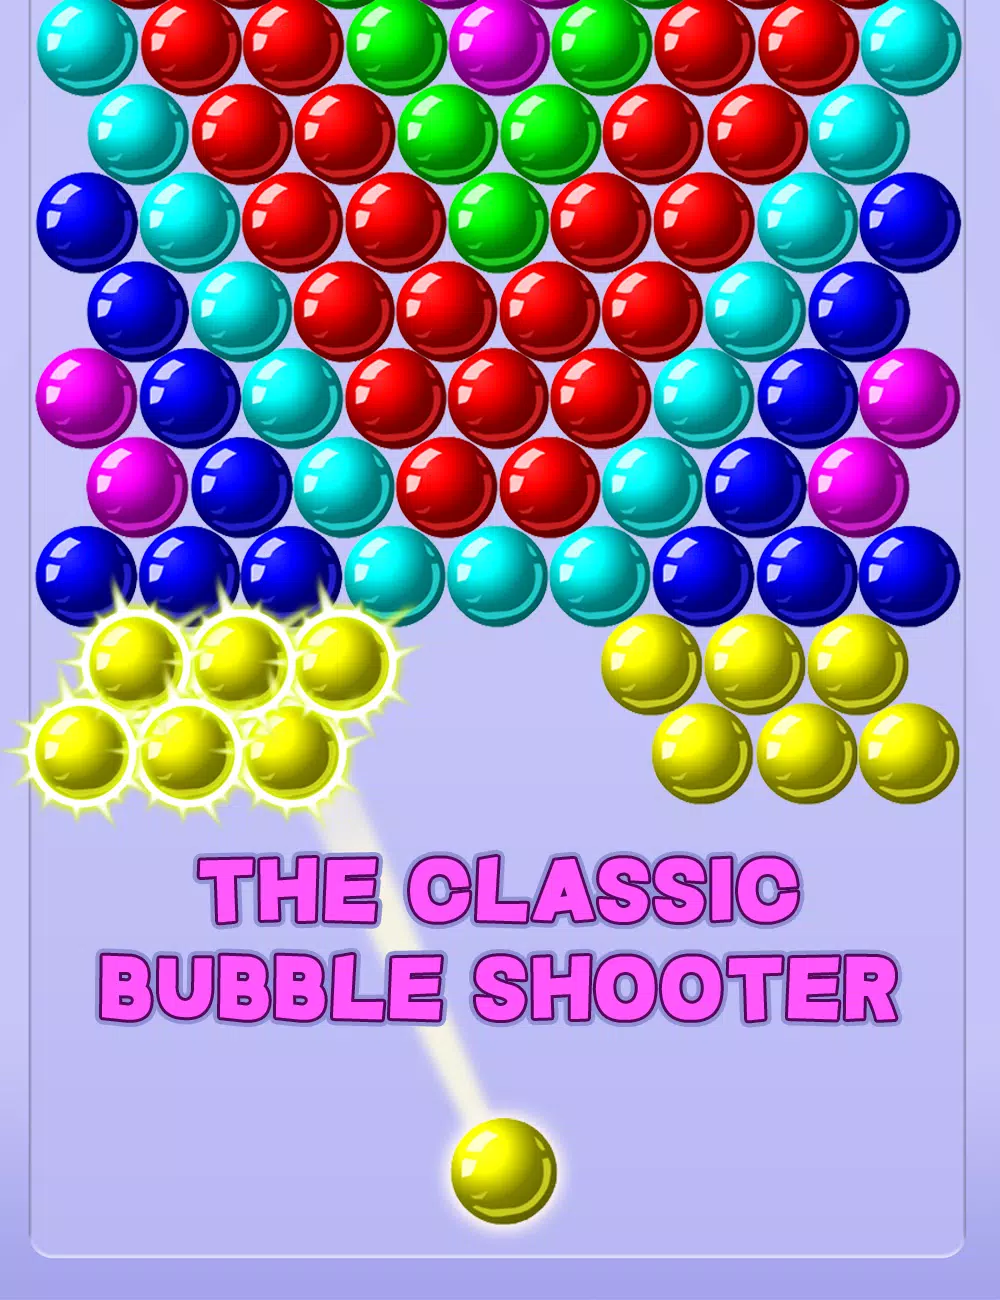 Download Free Android Game Bubble Shooter